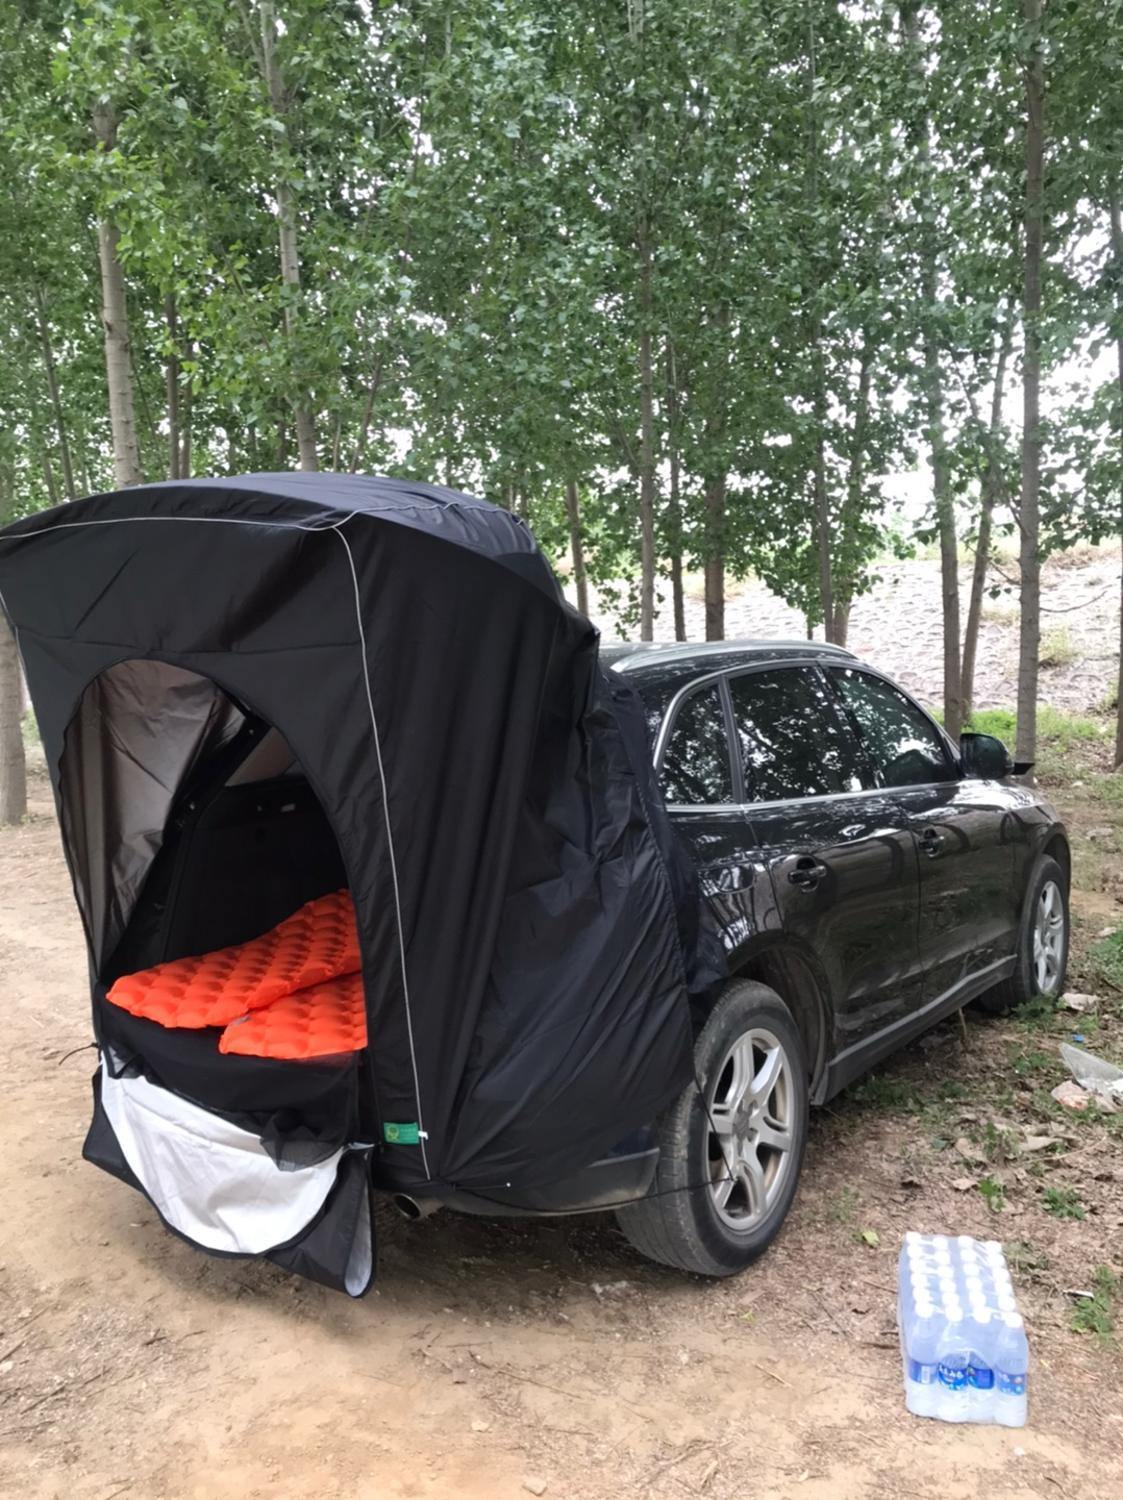 Buy Canopy Tail Ledger Car Tent with Picnic Awning For Camping